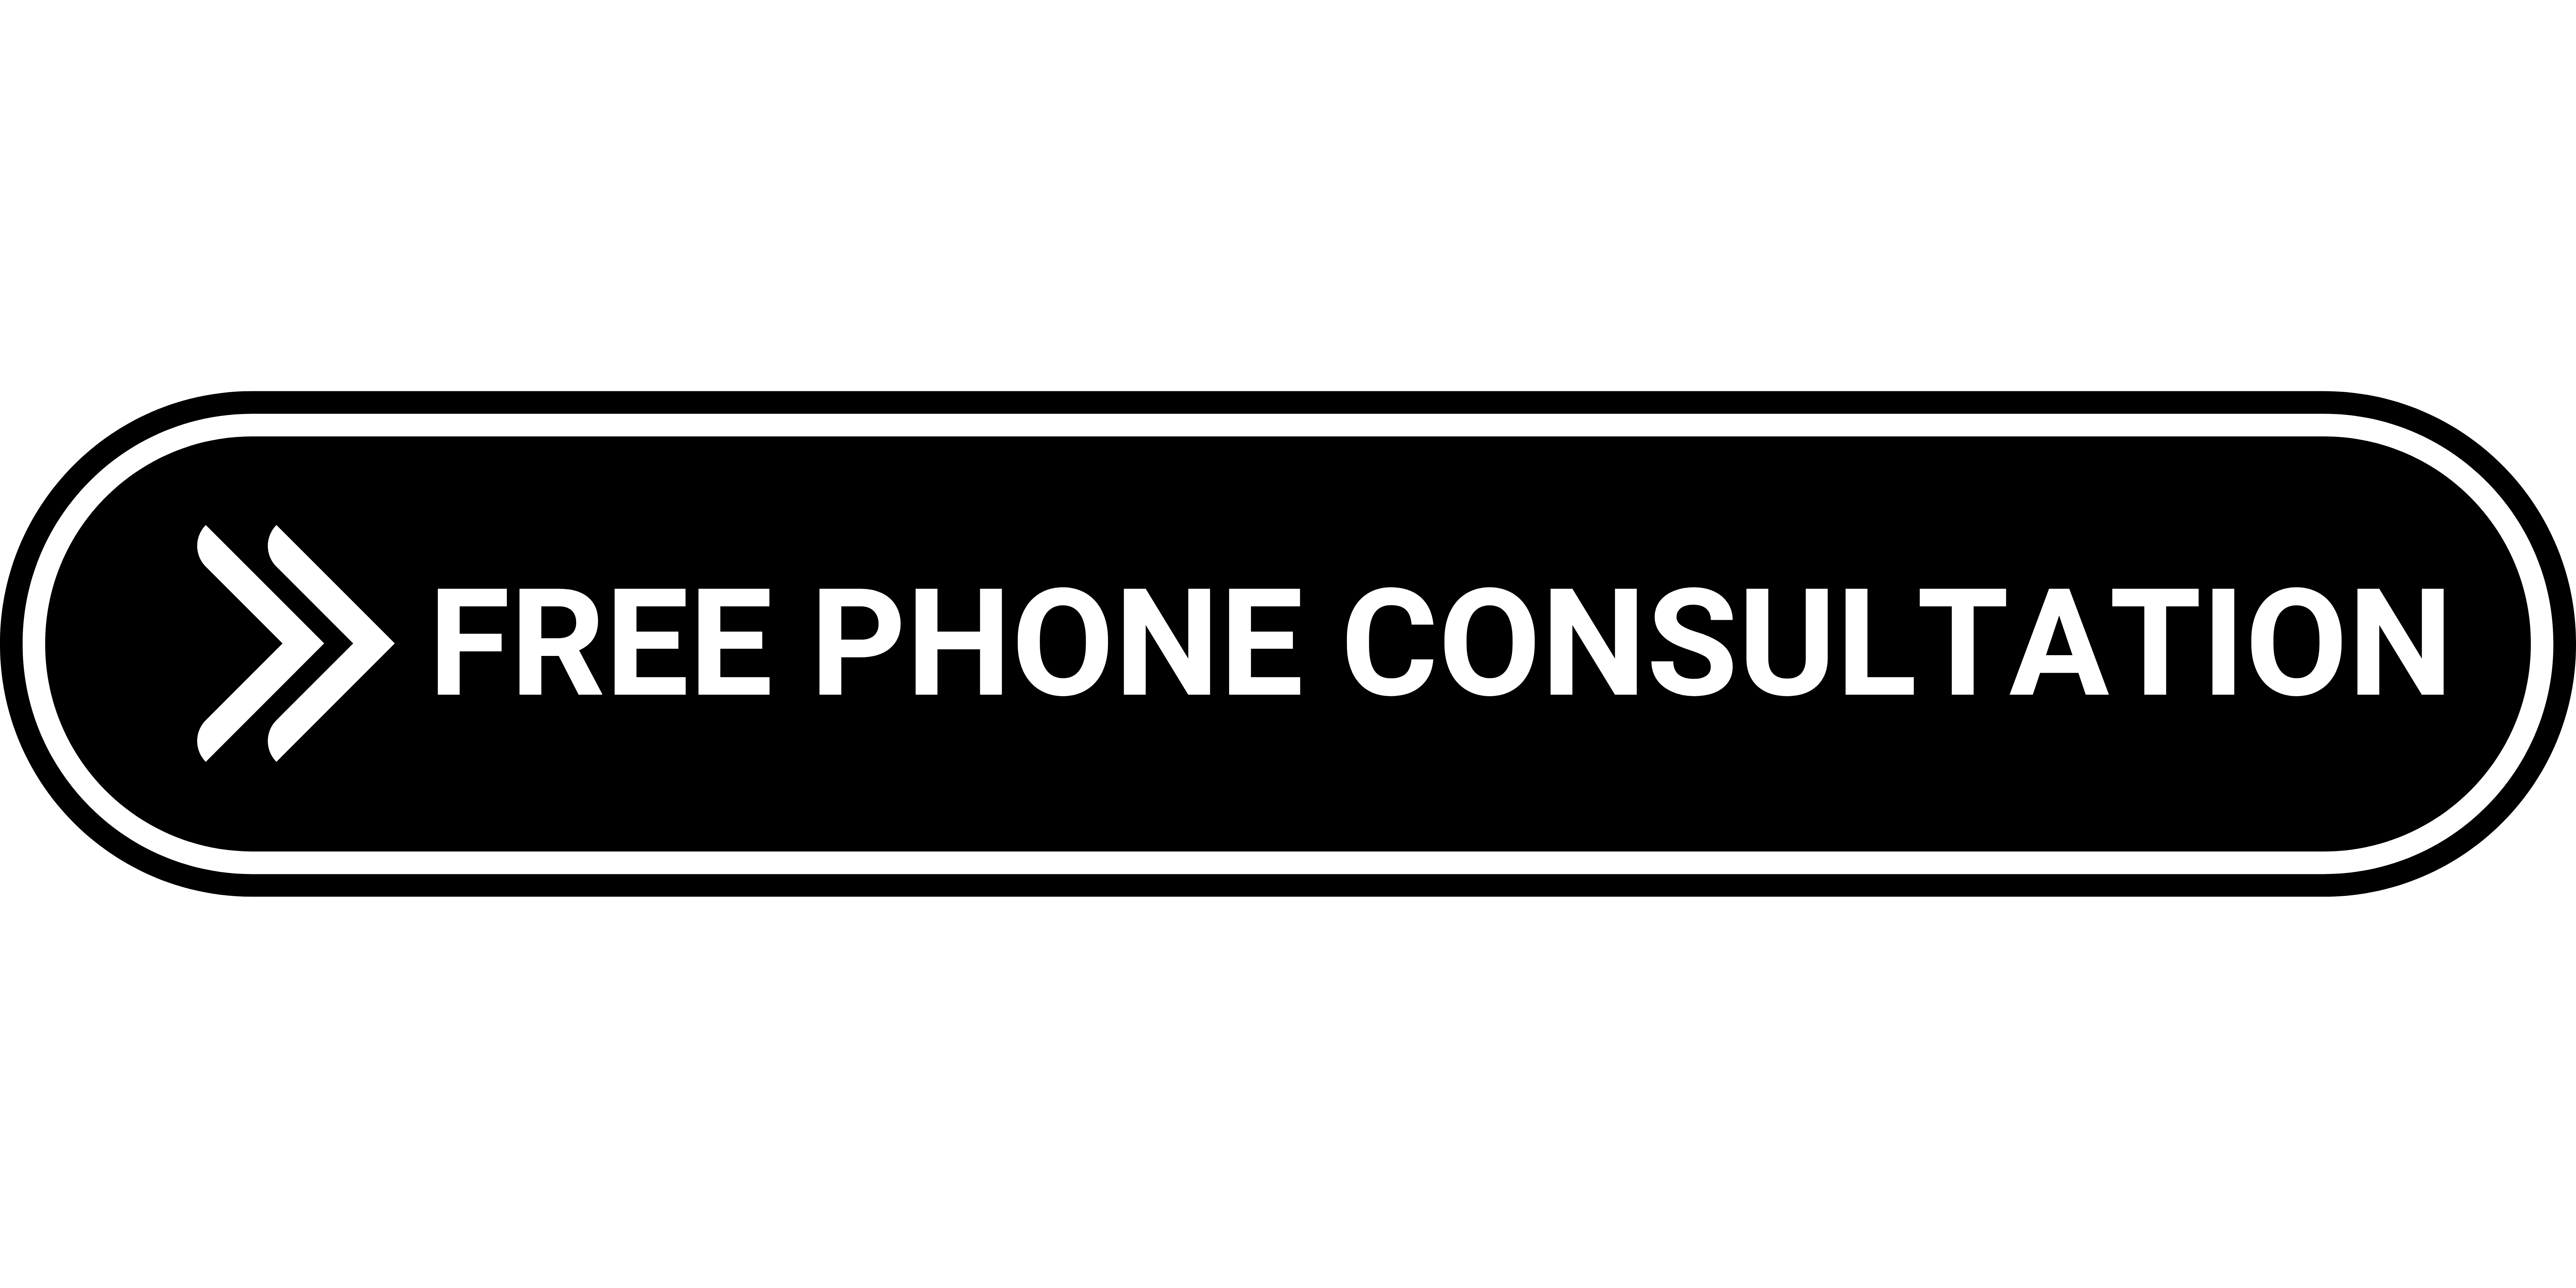 Free Consultation button that redirects to a booking page.